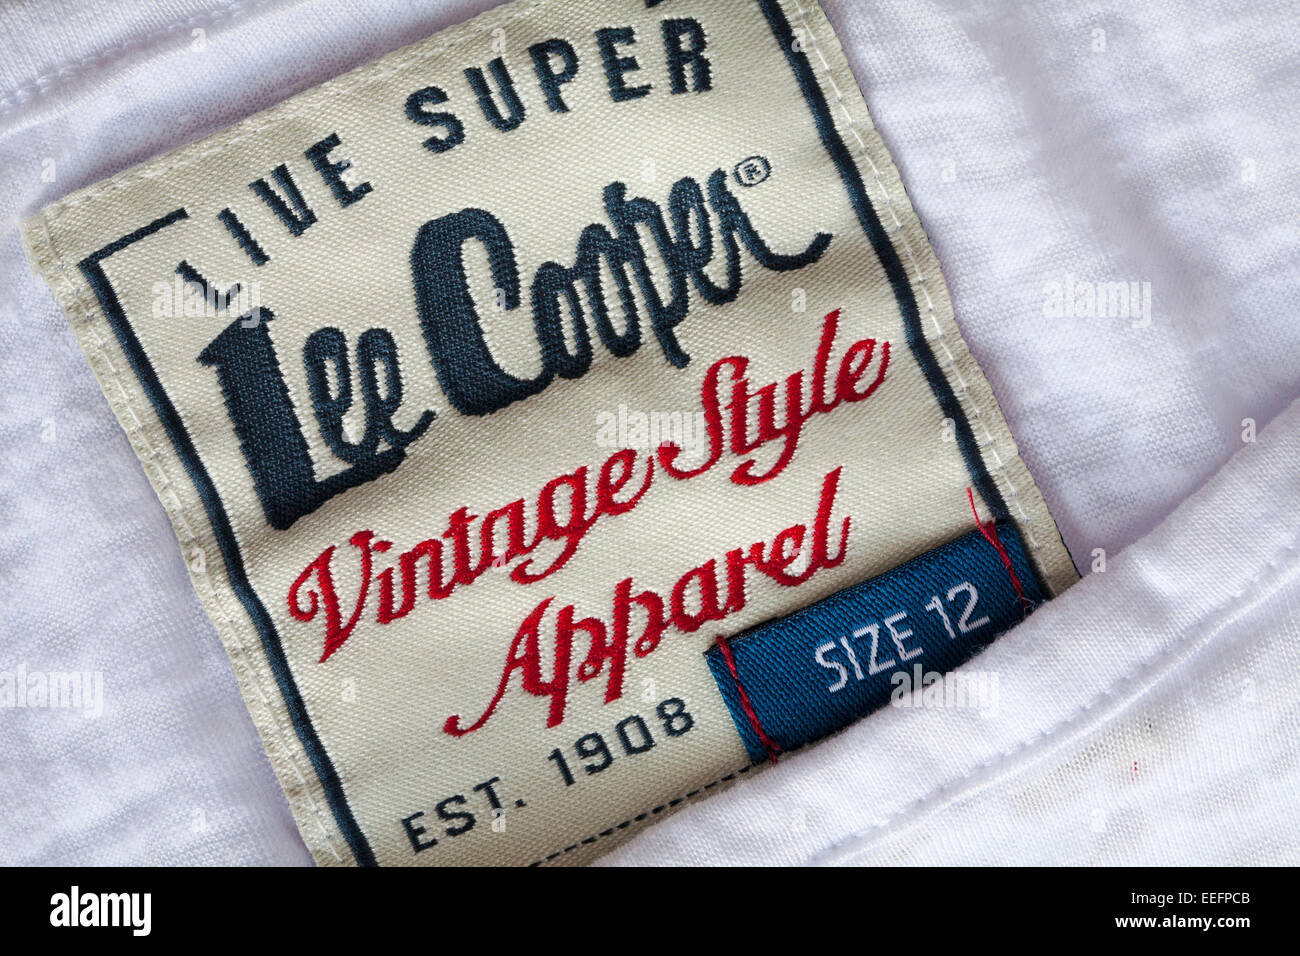 Lee cooper logo hi-res stock photography and images - Alamy